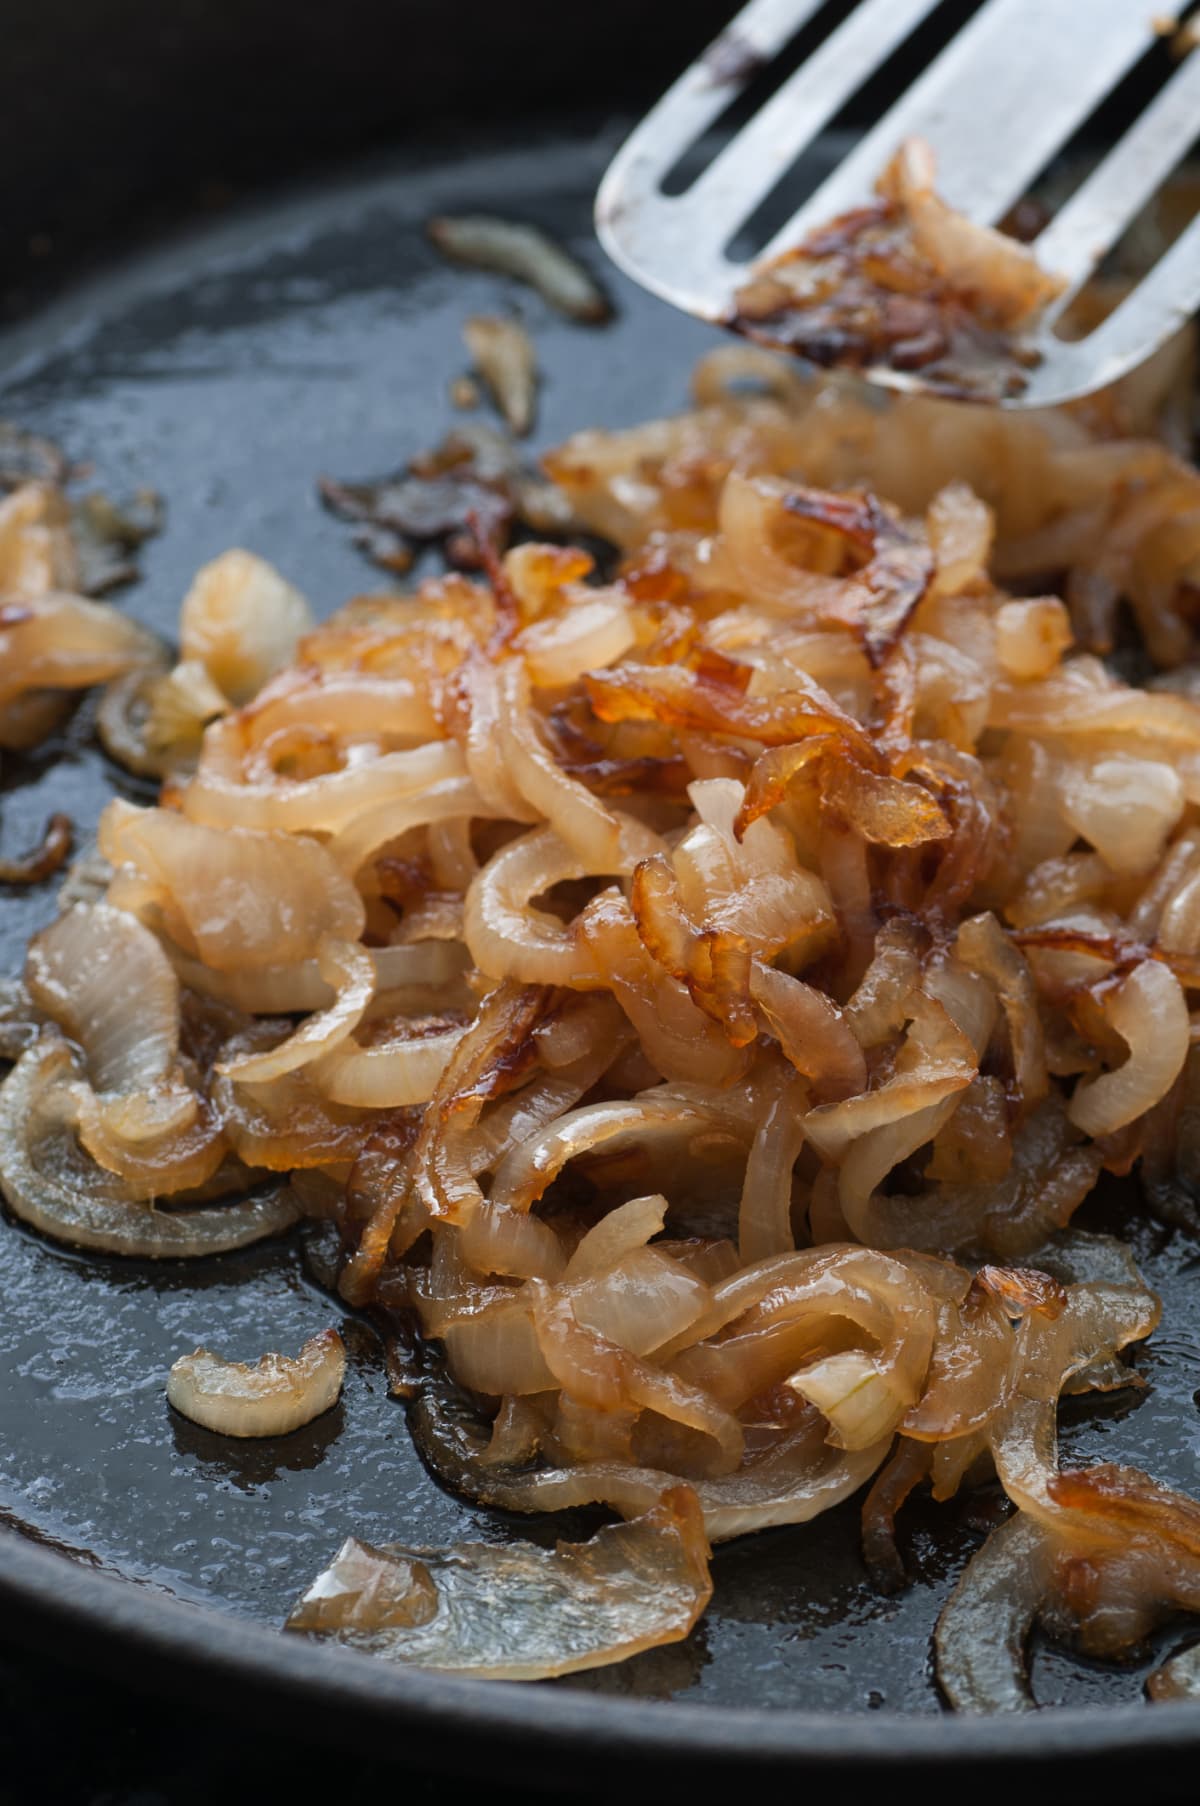 Caramelized onion in a frying pan.